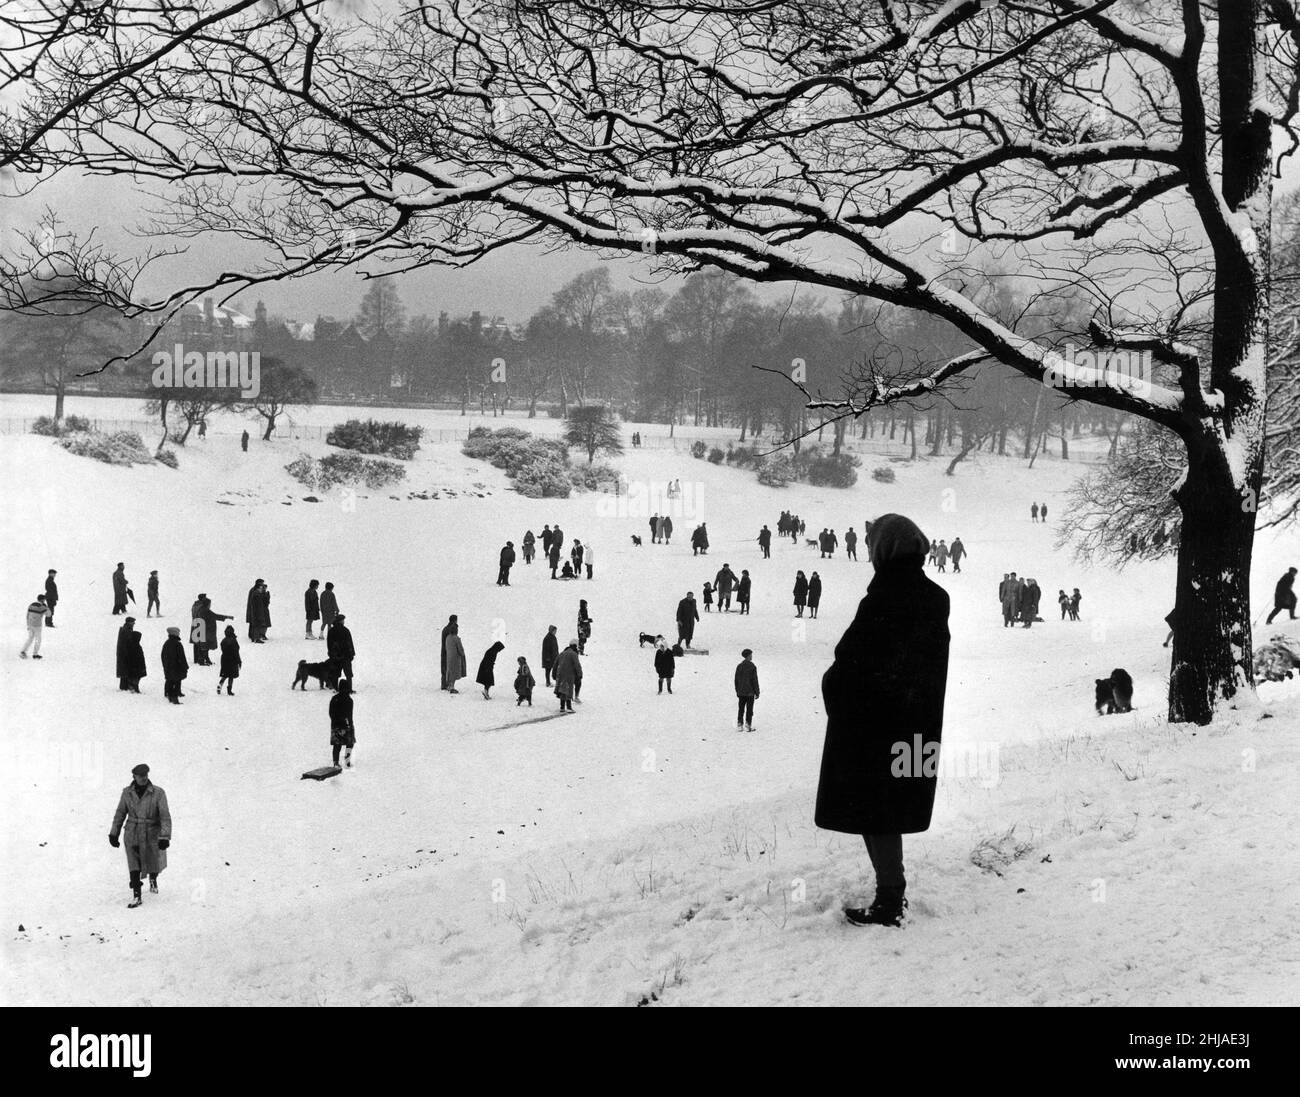 An afternoon walk on the park lake. The overnight fall of snow ruined skating chances on Sefton Park lake but many people had the experience of walking on the lake. The Parks Department allowed this for the first time in 15 years. Liverpool, Merseyside. 21st January 1963. Stock Photo